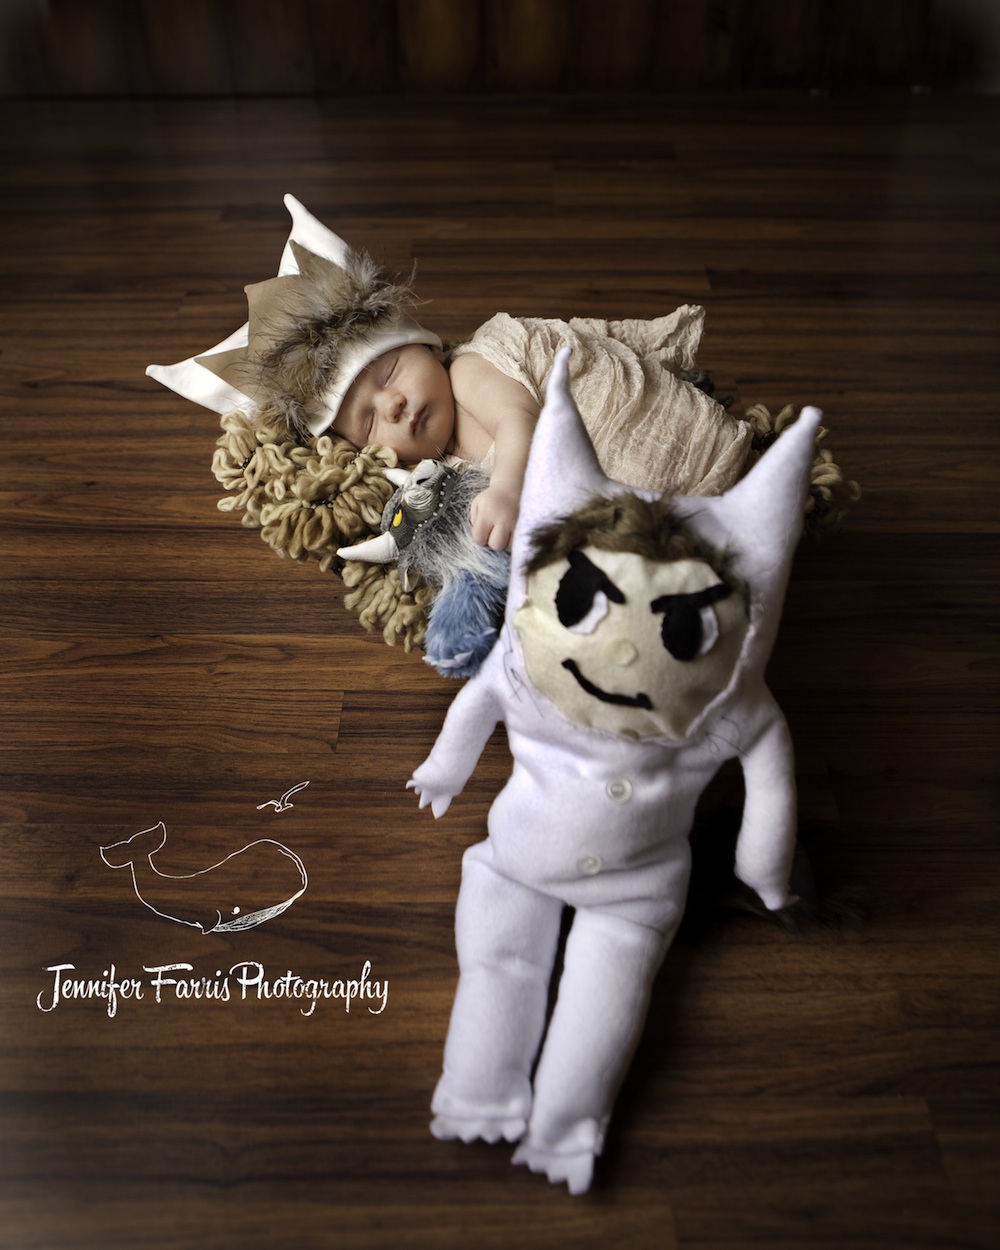  Where the Wild Things Are Themed Newborn Photo Session with Bernard and Max | Jennifer Farris Photography | as seen on GiggleHearts.com 